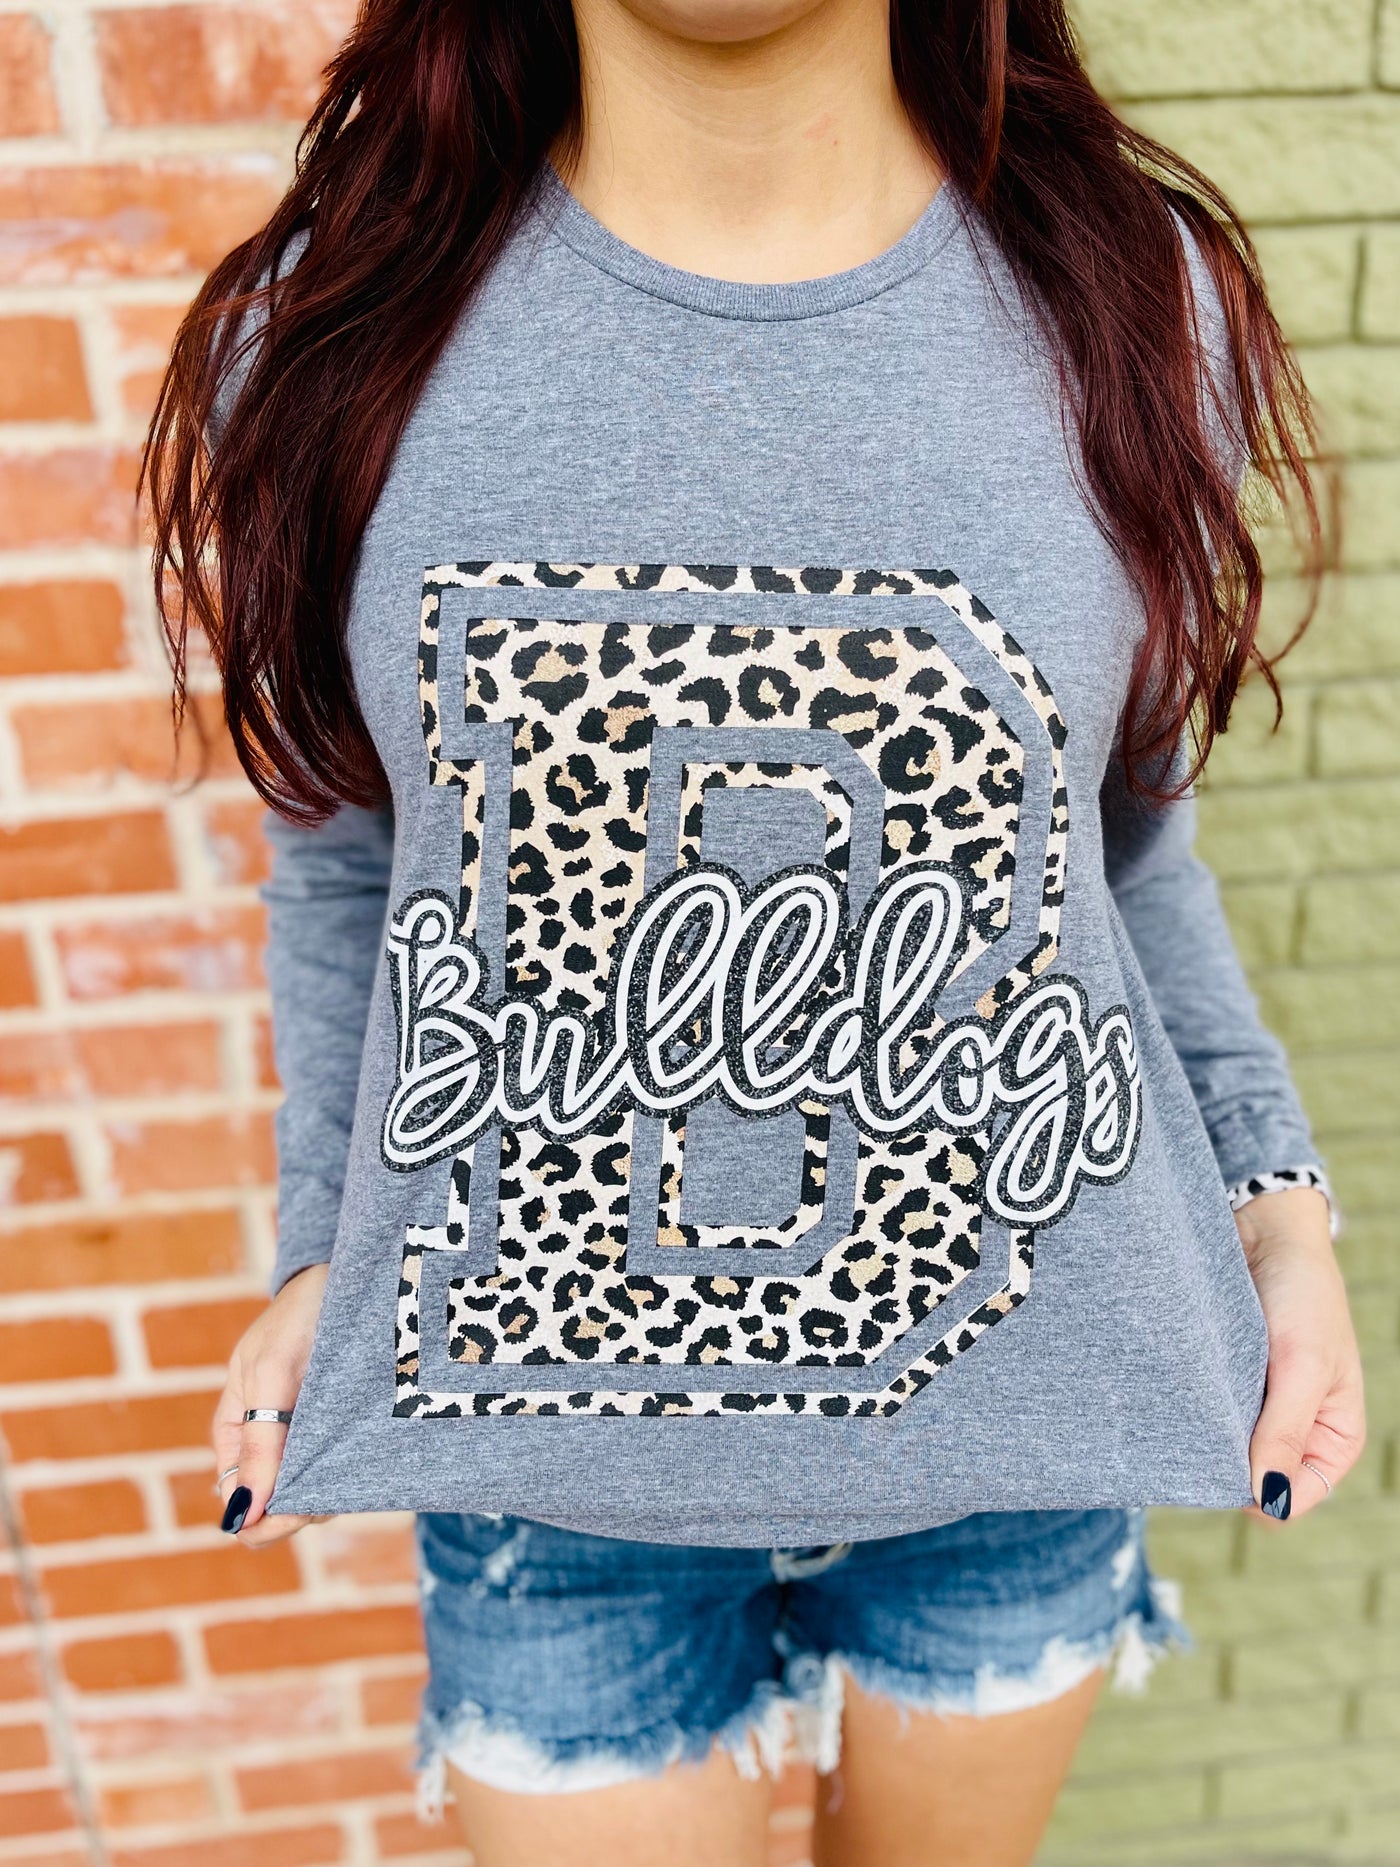 B Leopard Block Bulldogs Graphic Tee-Harps & Oli-Shop Anchored Bliss Women's Boutique Clothing Store